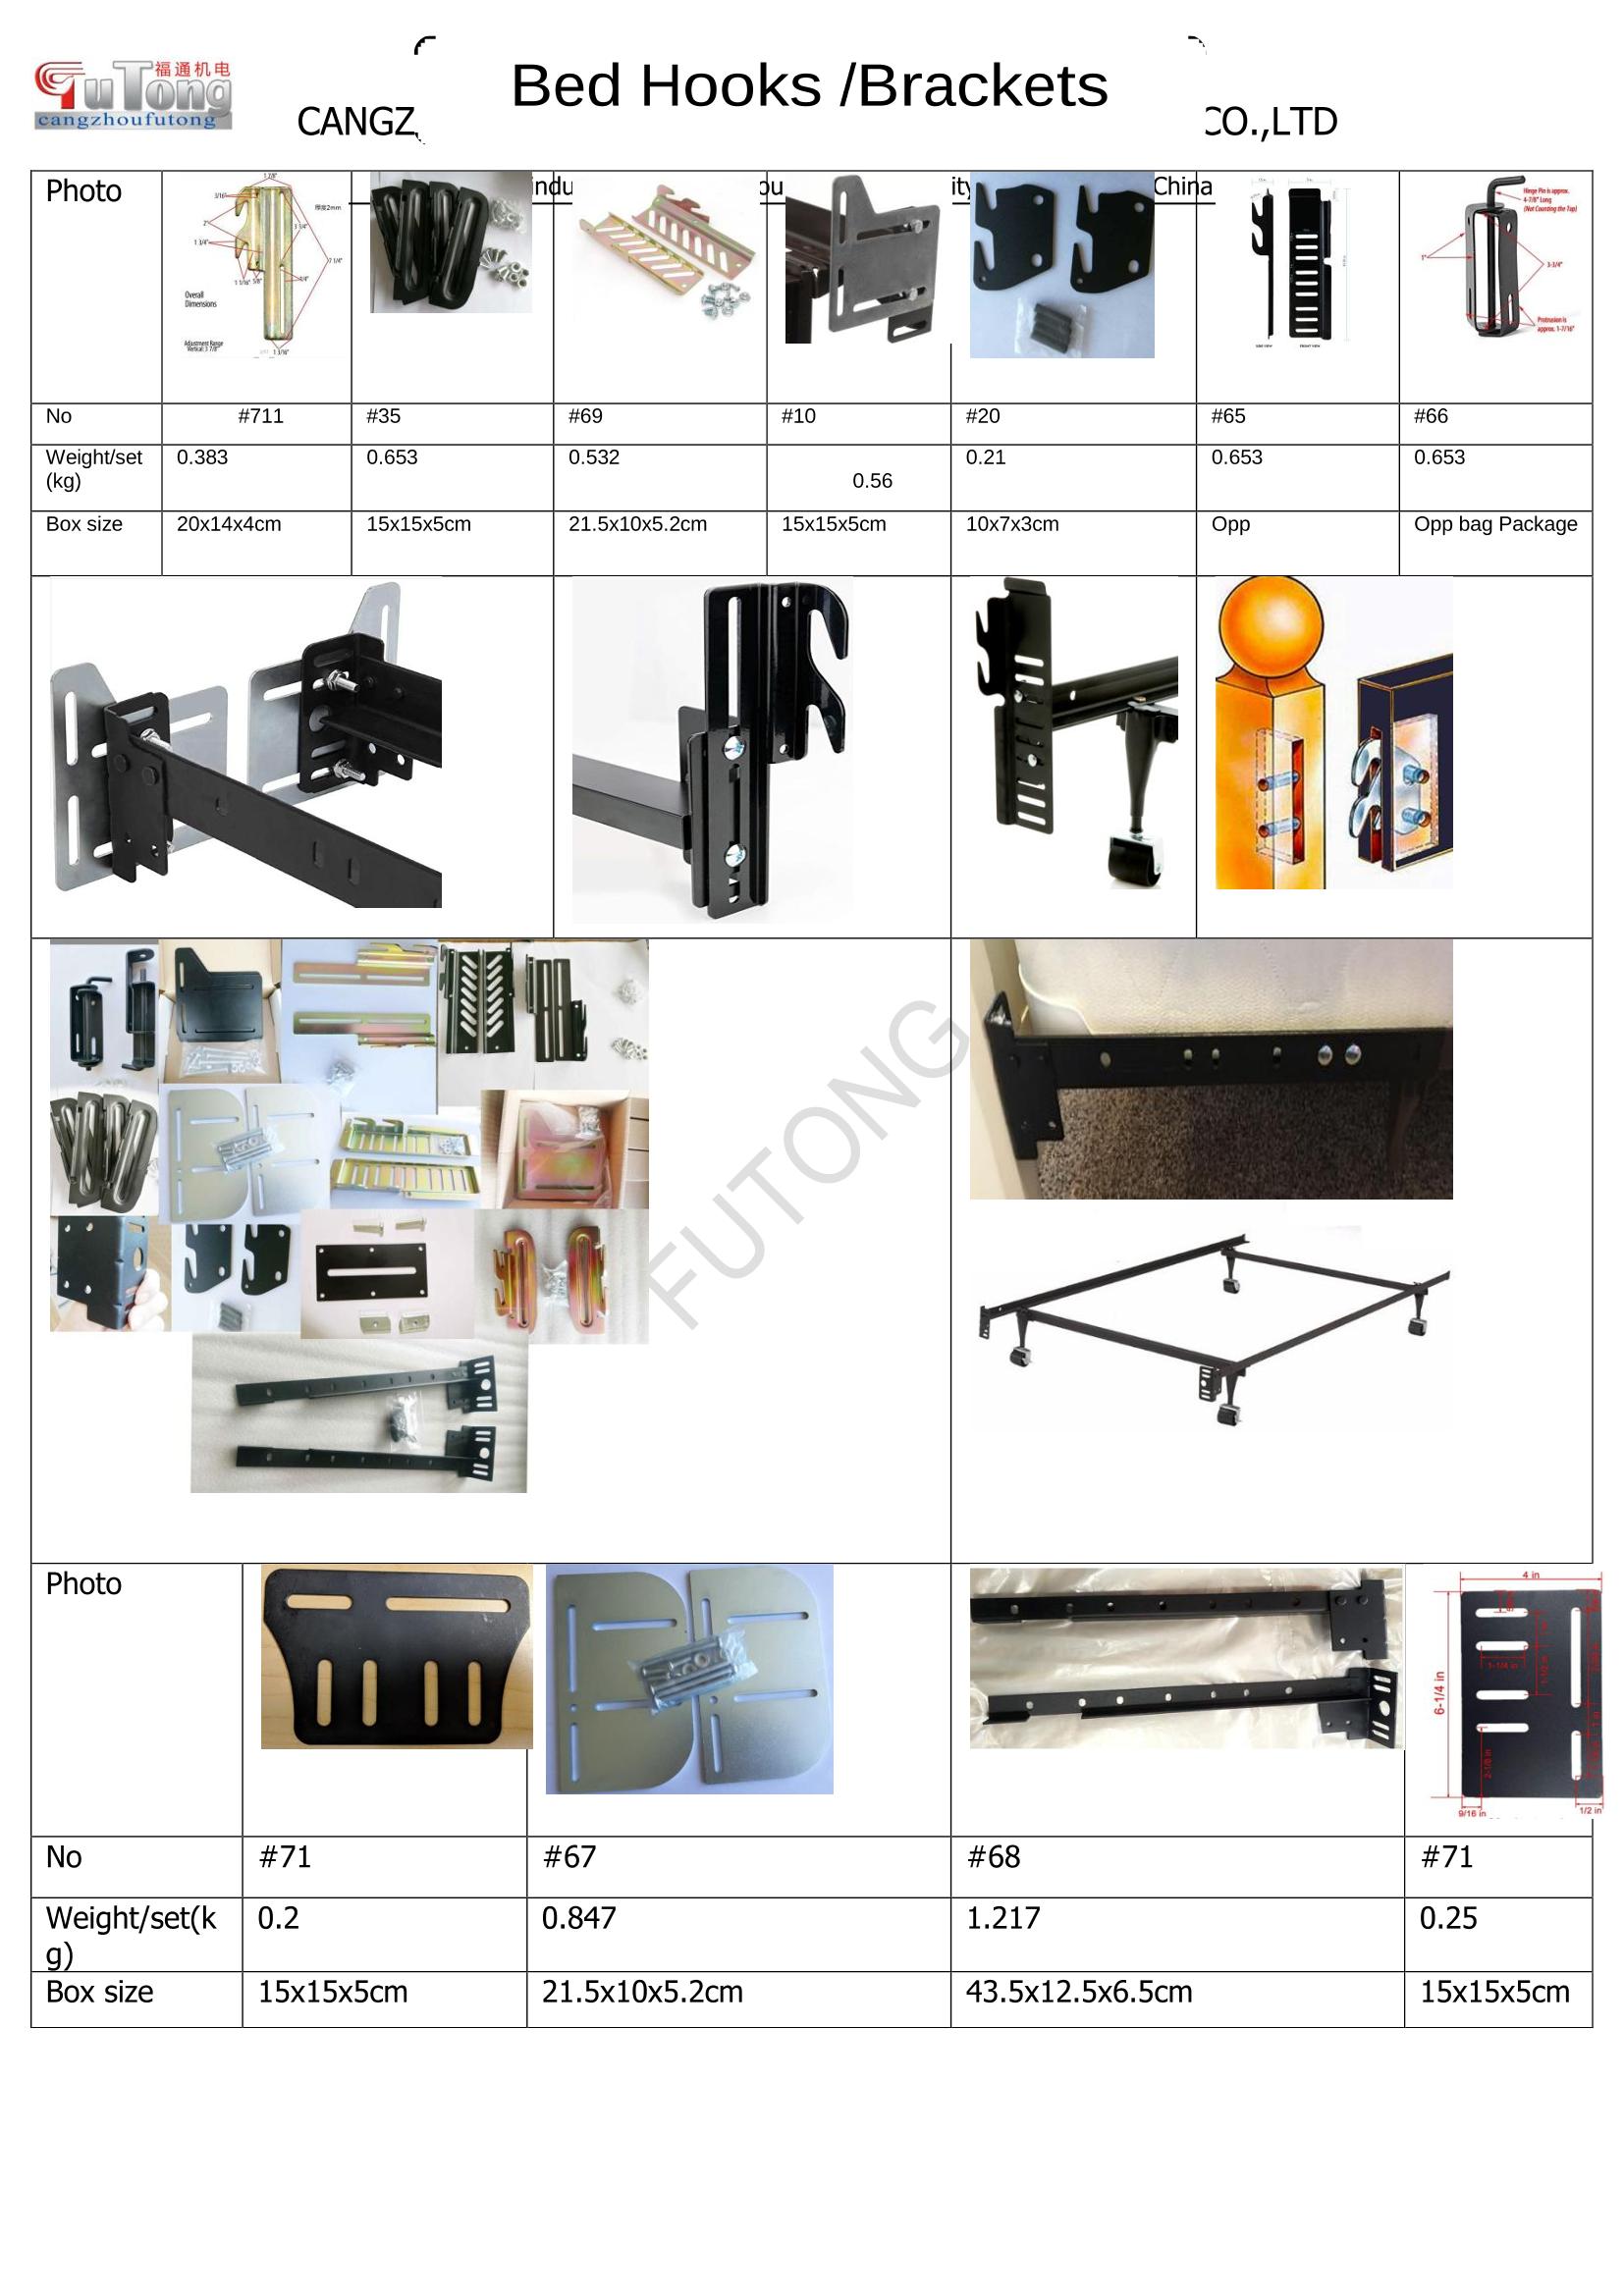 Hot Products from Cangzhoufutong_7.jpg